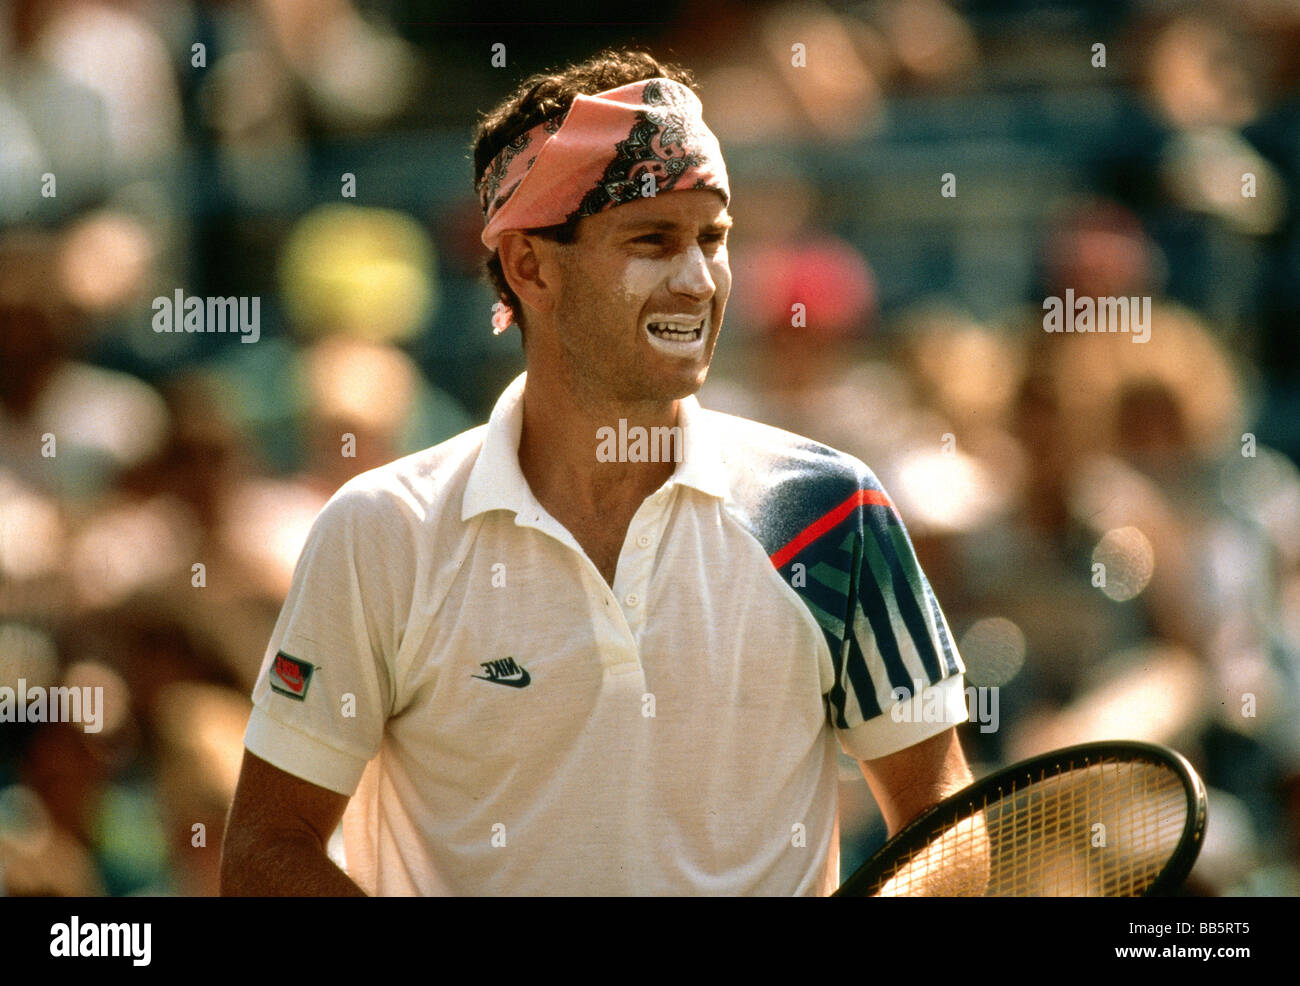 McEnroe, John, * 16.2.1959, US tennis player, during one of his matches, circa 1990s, Stock Photo